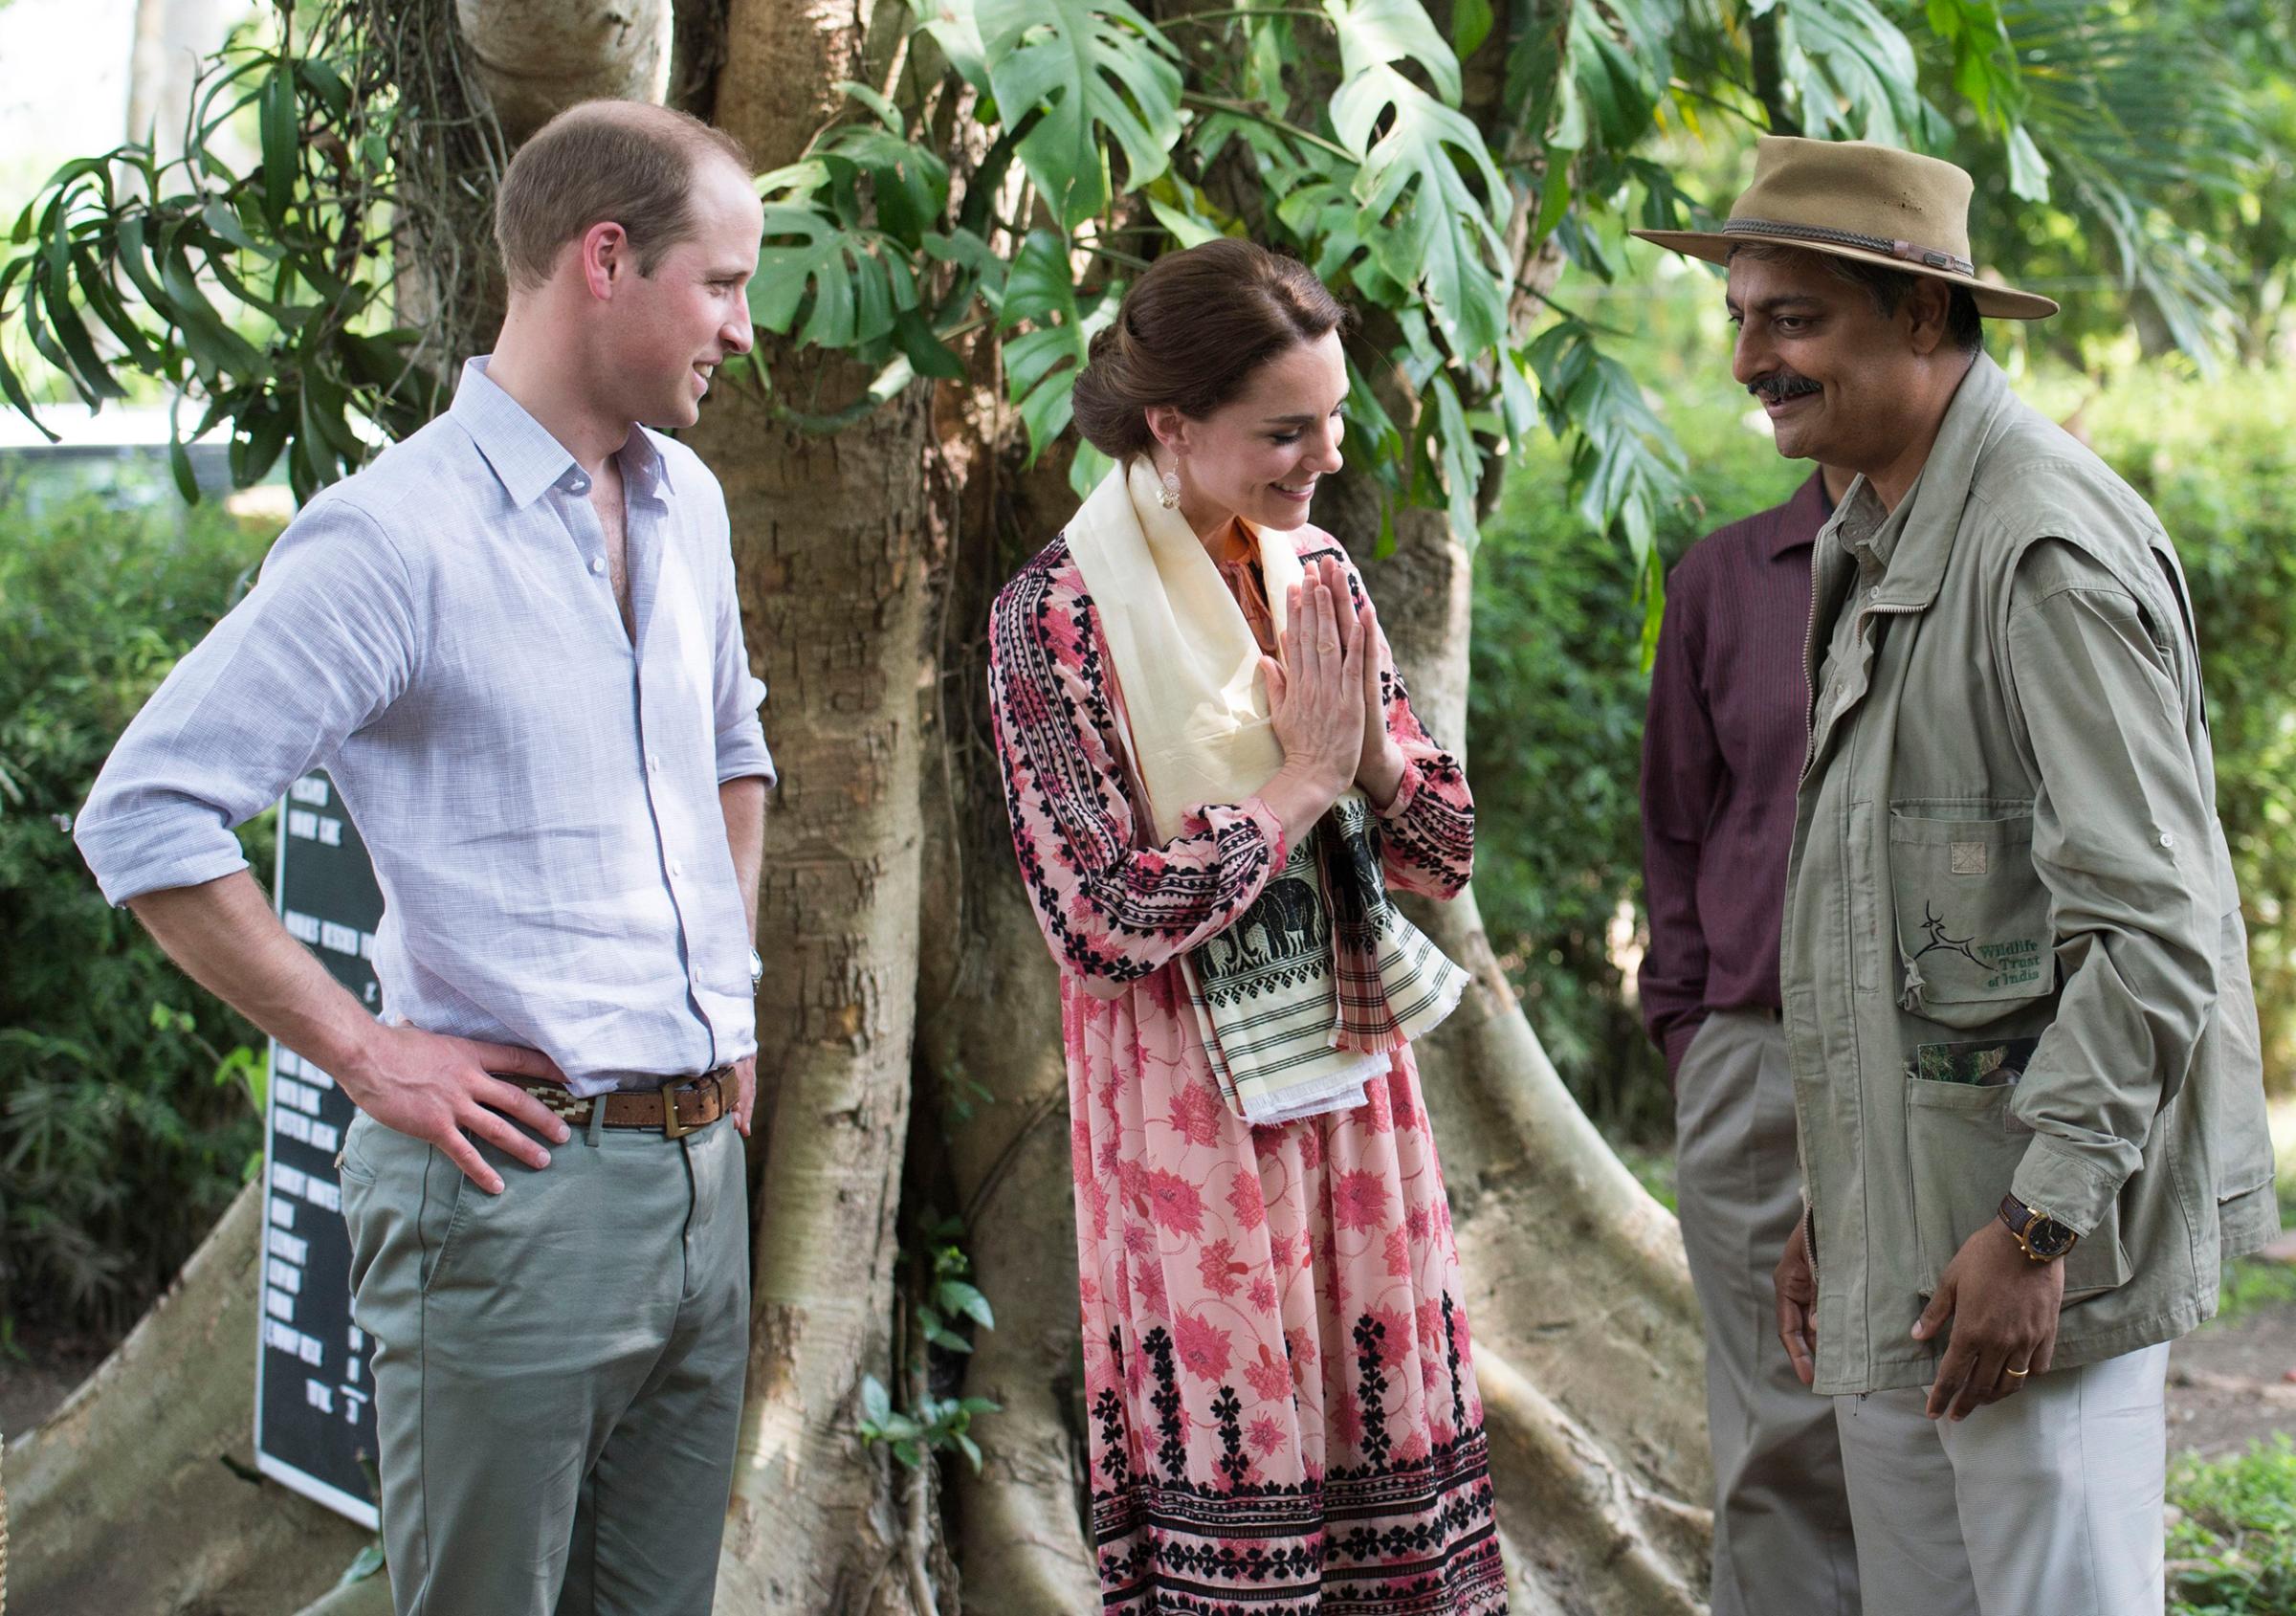 The Duke and Duchess of Cambridge during a visit to the Centre for Wildlife Rehabilitation and Conservation in Kaziranga, India on April 13, 2016.